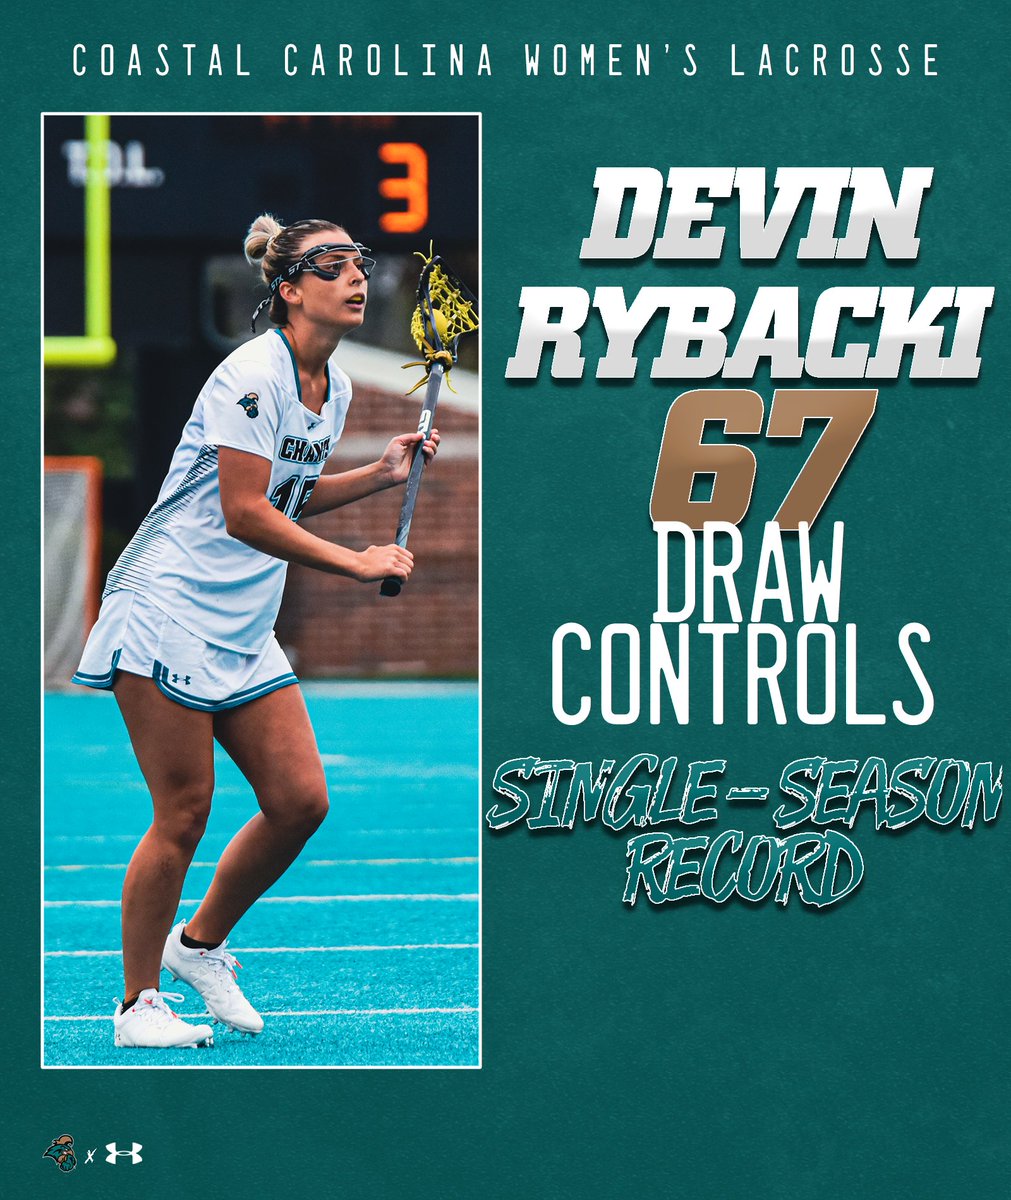 ICYMI: @RybackiDevin is the new single-season record holder with 67 draw control wins this season!!! She helped our offense get off to a great start by helping us gain possession of the ball!!!

#TEALNATION #ChantsUp #ASUNWLax